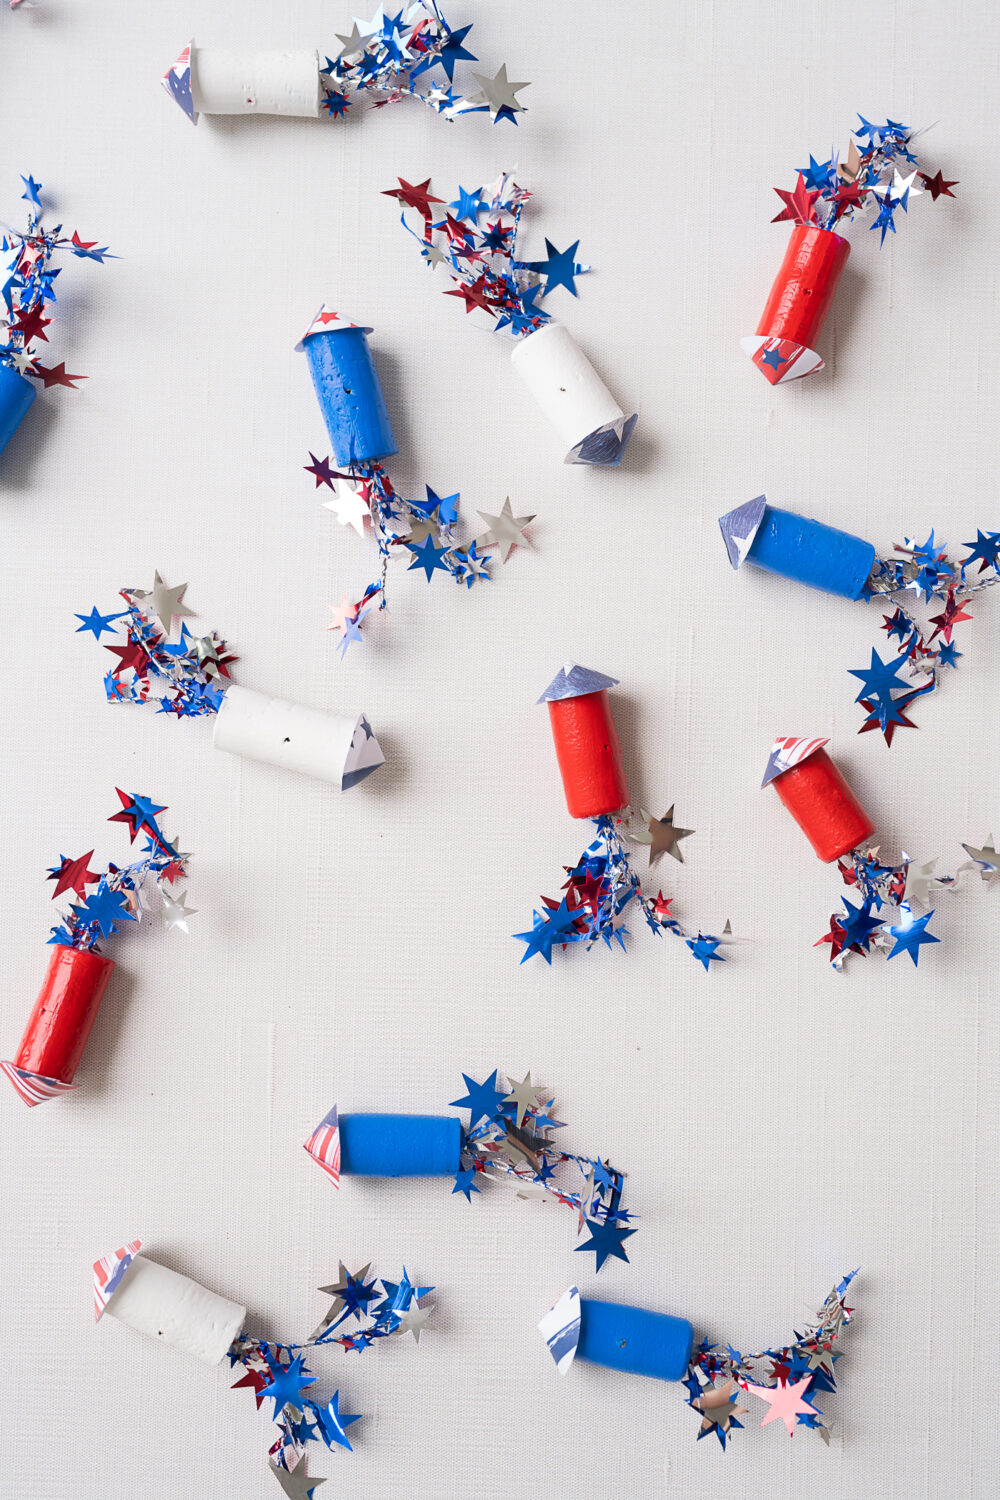 Instructions: Upcycle Corks into DIY 4th of July Decorations